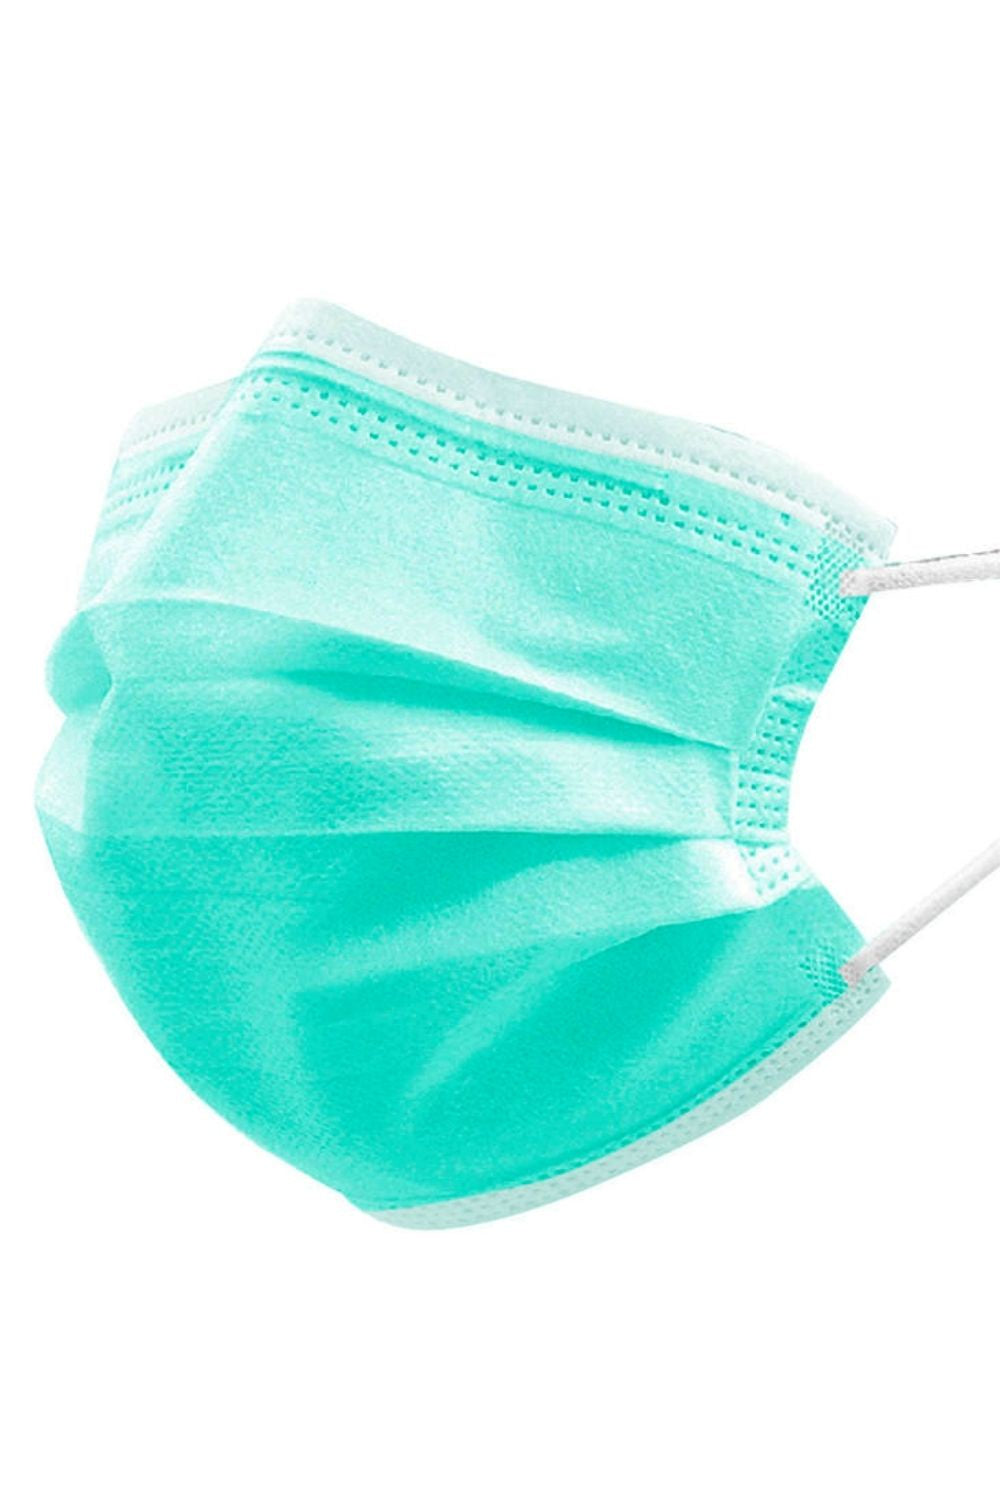 Disposable MEDICAL Face Mask - 3 Layers - Green - Box of 50